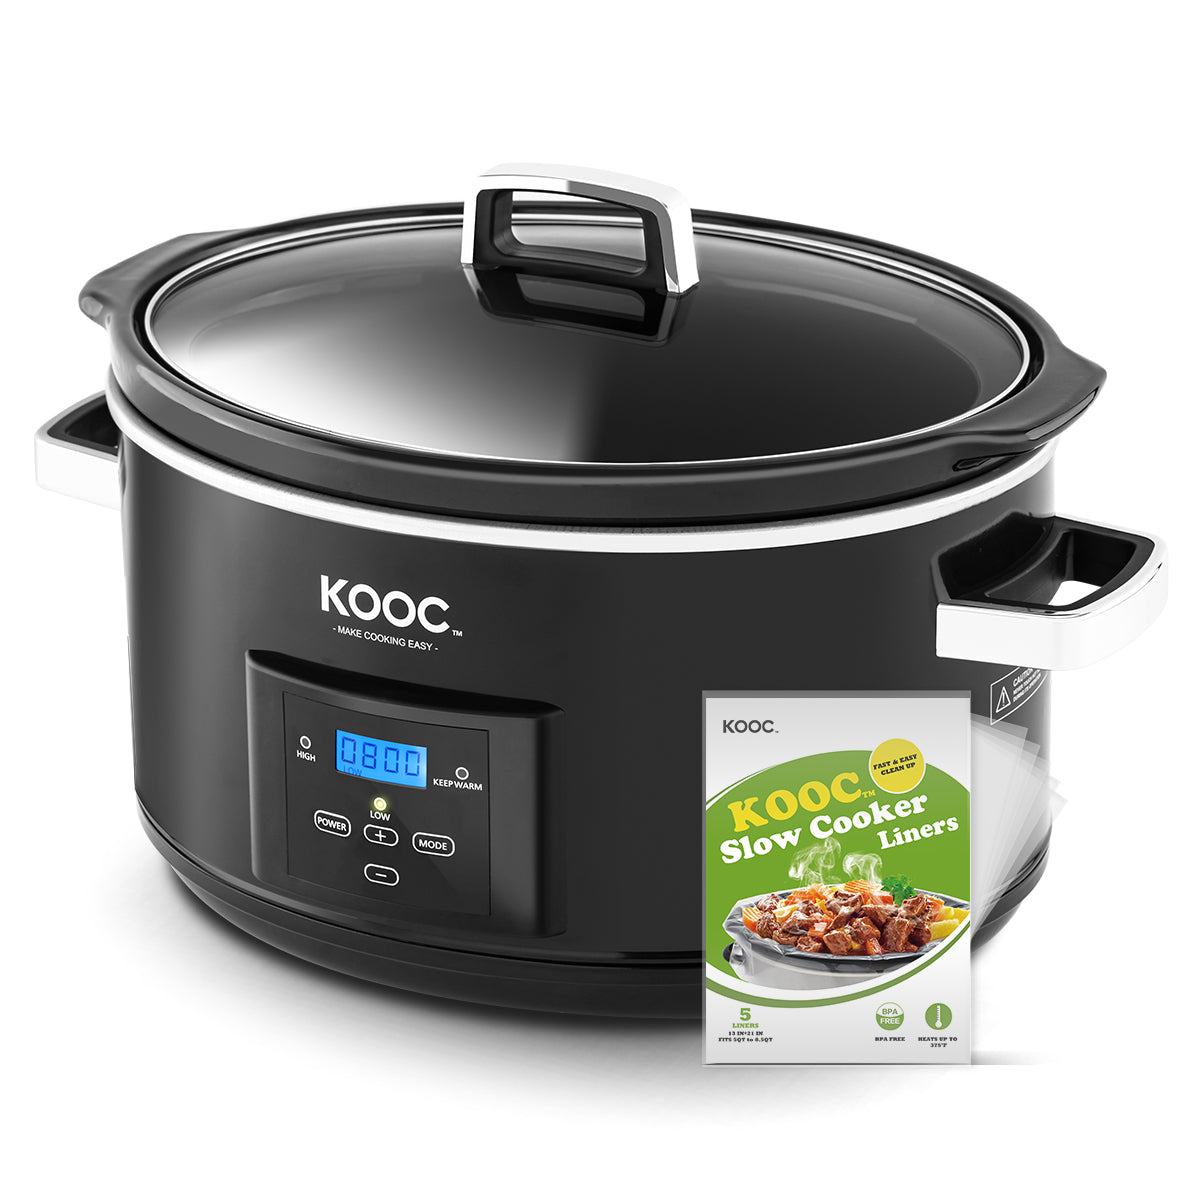 KOOC - Premium Programmable Slow Cooker - 8.5 Quart, with Free